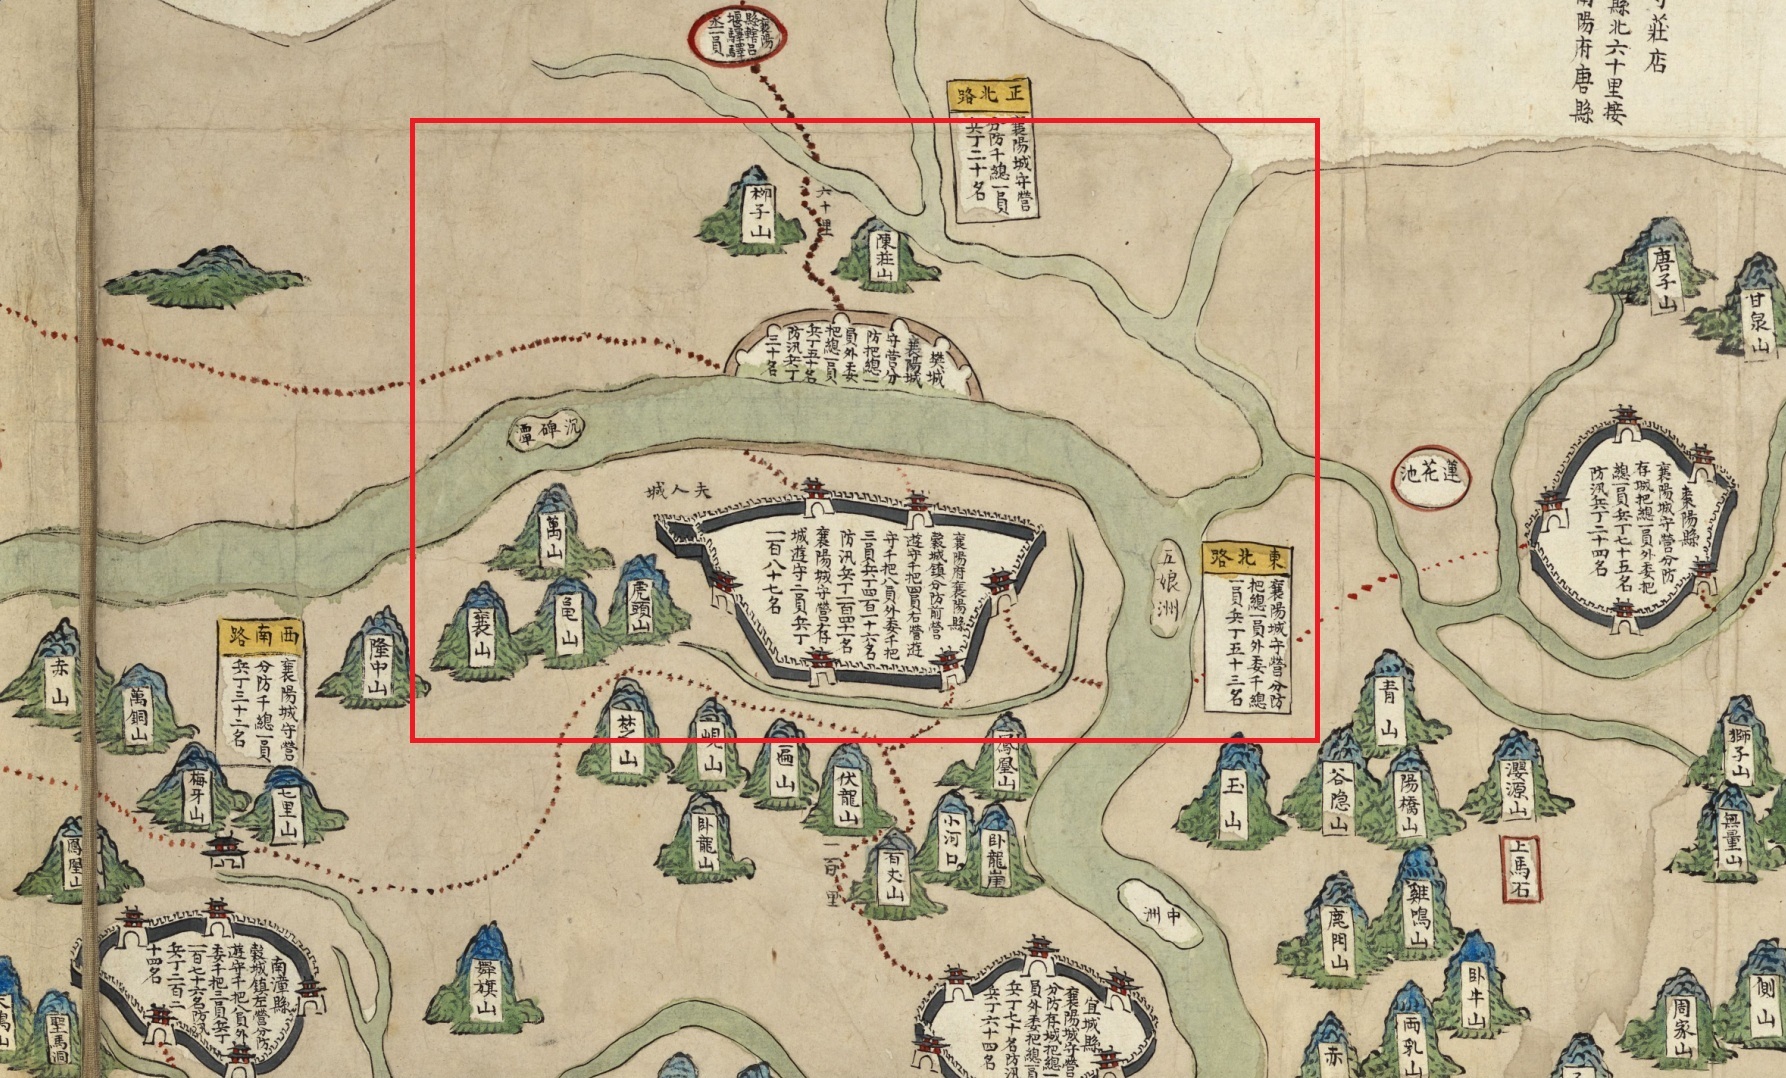 Xiangfan area in the painted map of Hubei in Qing Dynasty